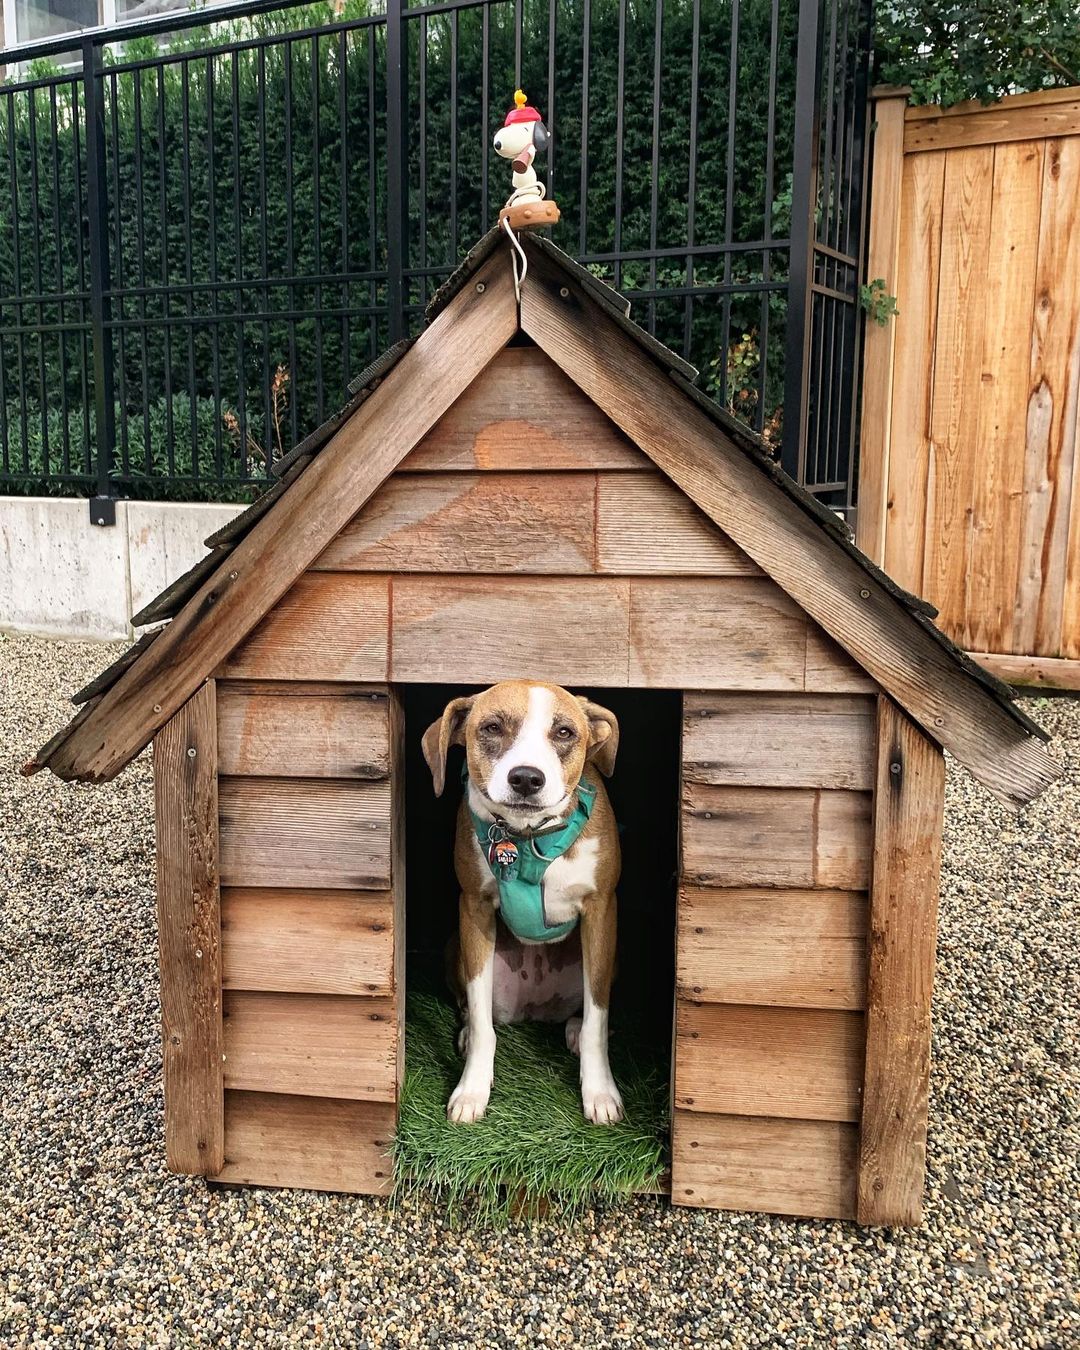 Learn How To Build A Diy Dog House - Insecula